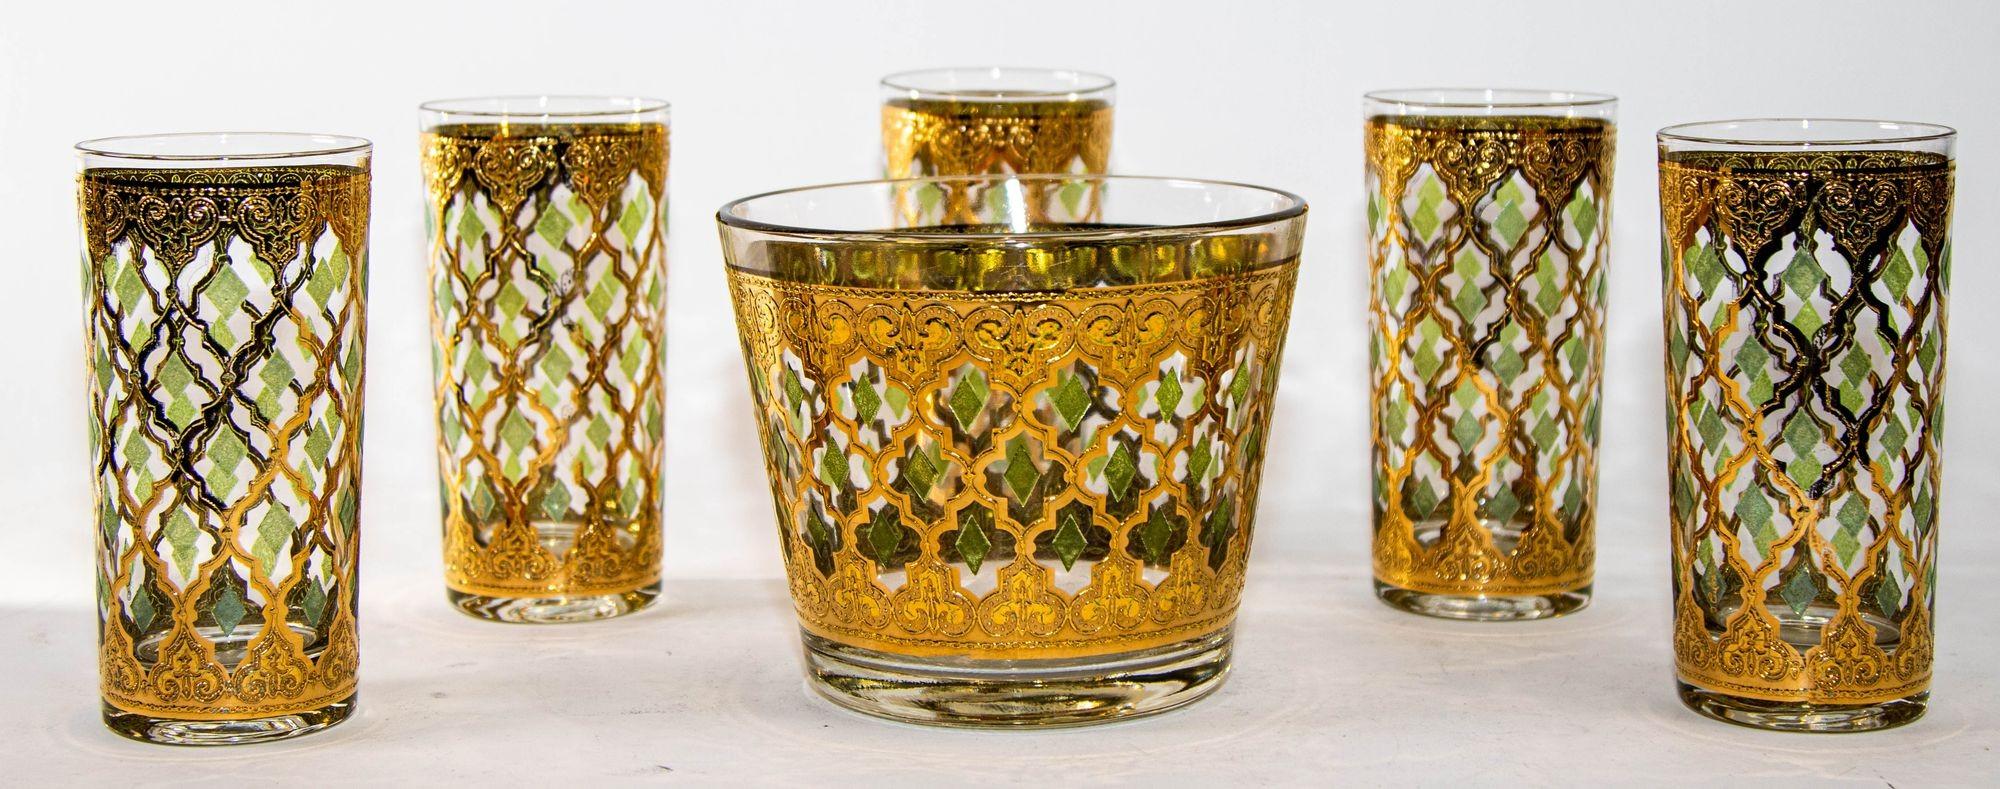 1960s Culver Ltd Highball Glasses and Ice Bucket 22 k Gold Valencia Design For Sale 7